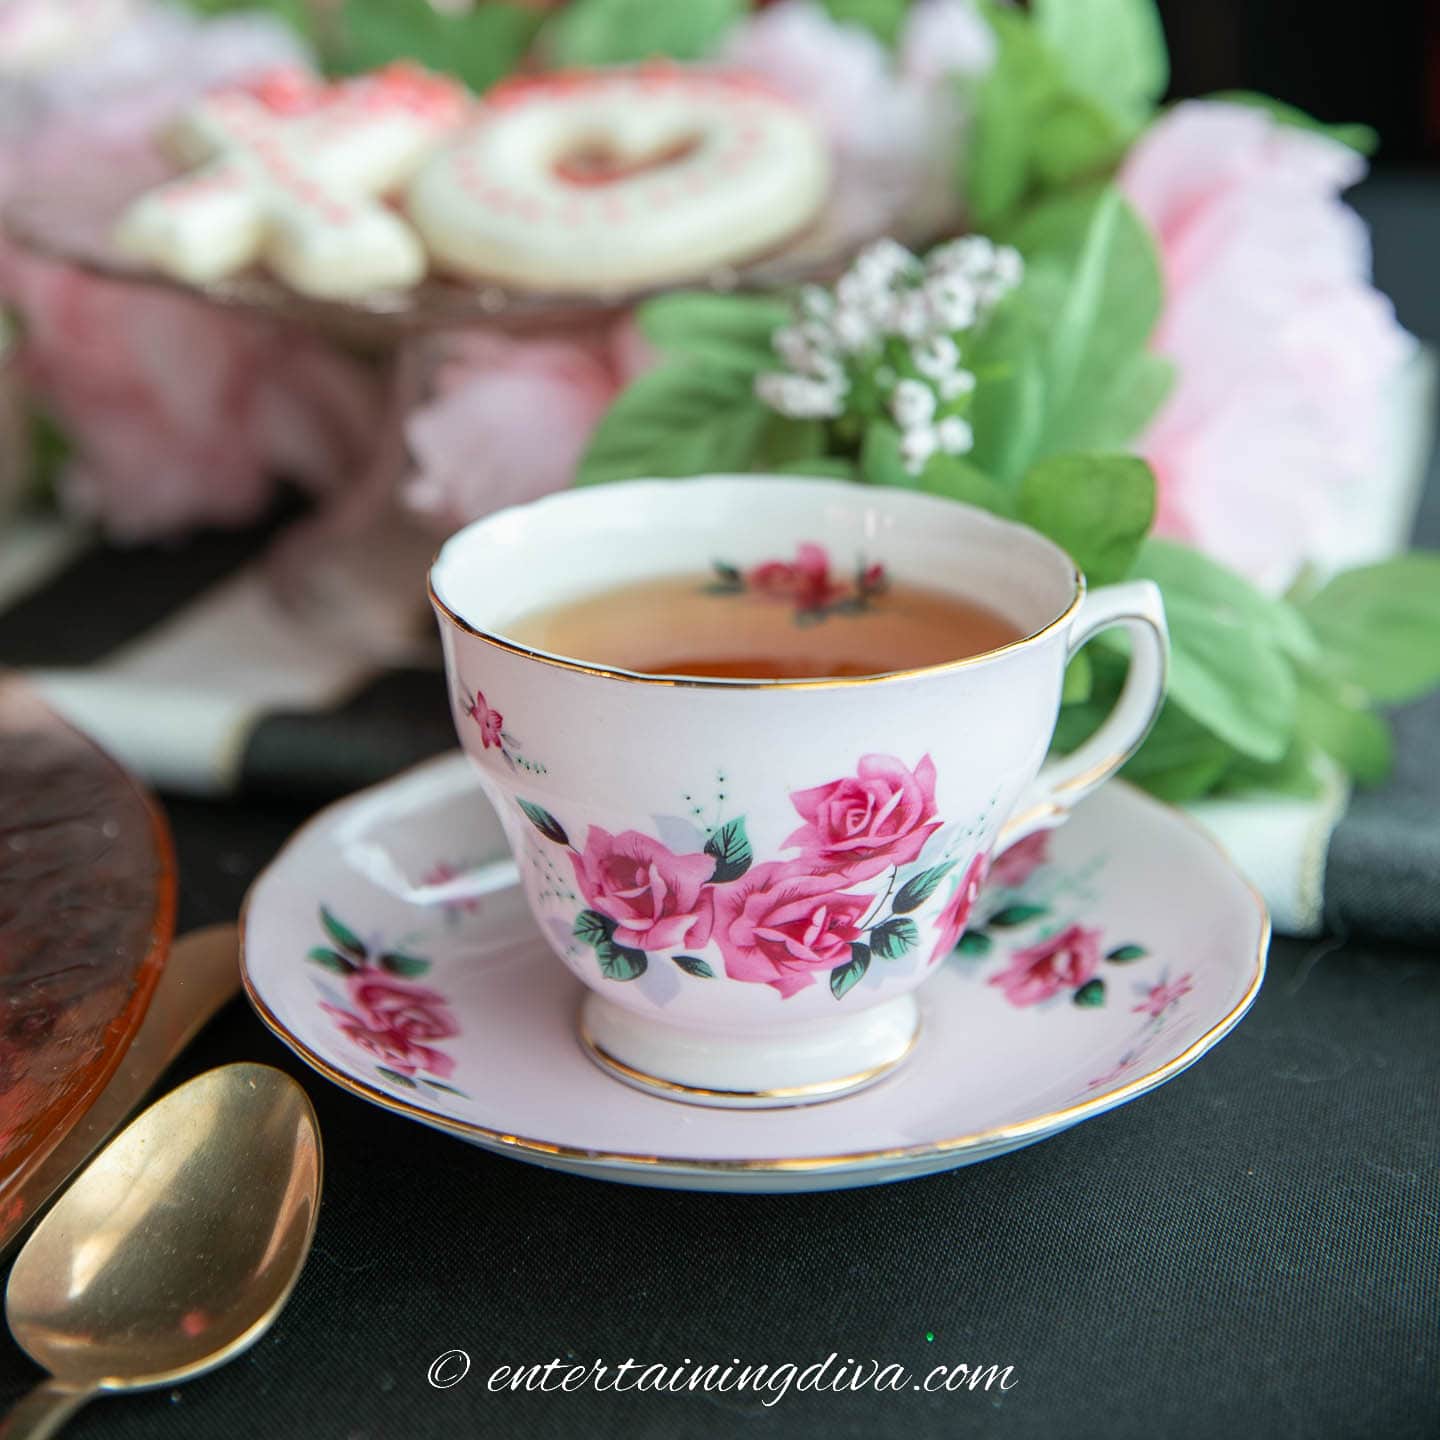 A teacup and saucer with flowers in the background